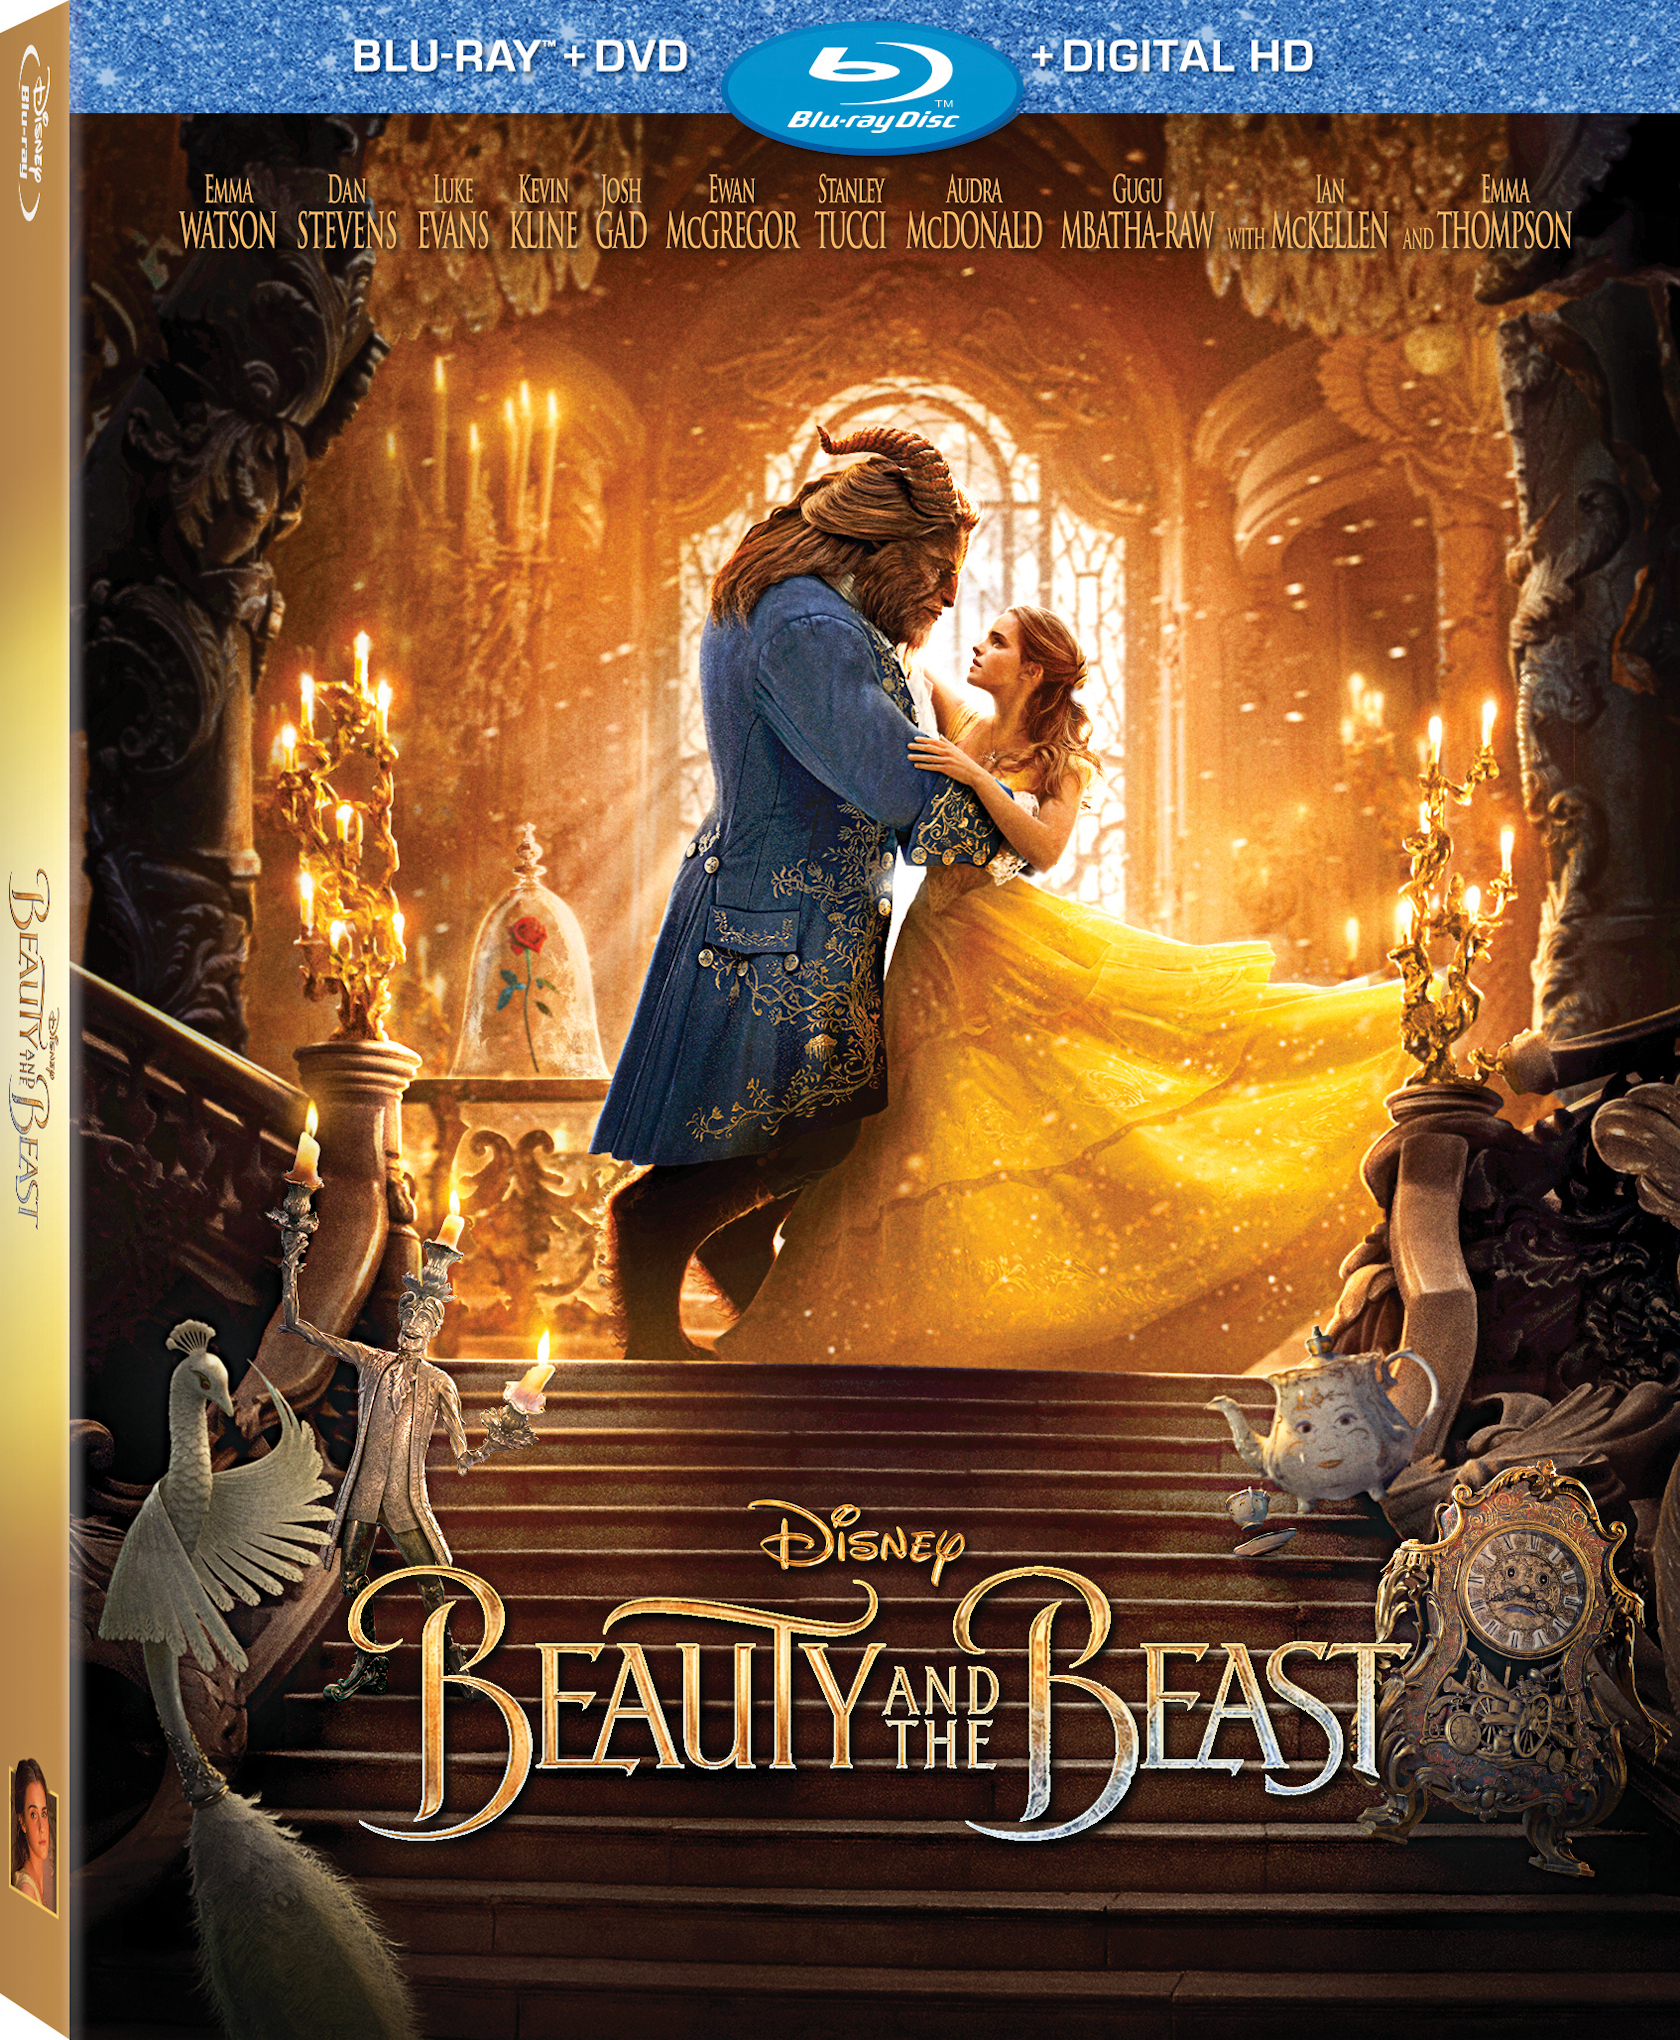 Beauty and the Beast (film) - D23